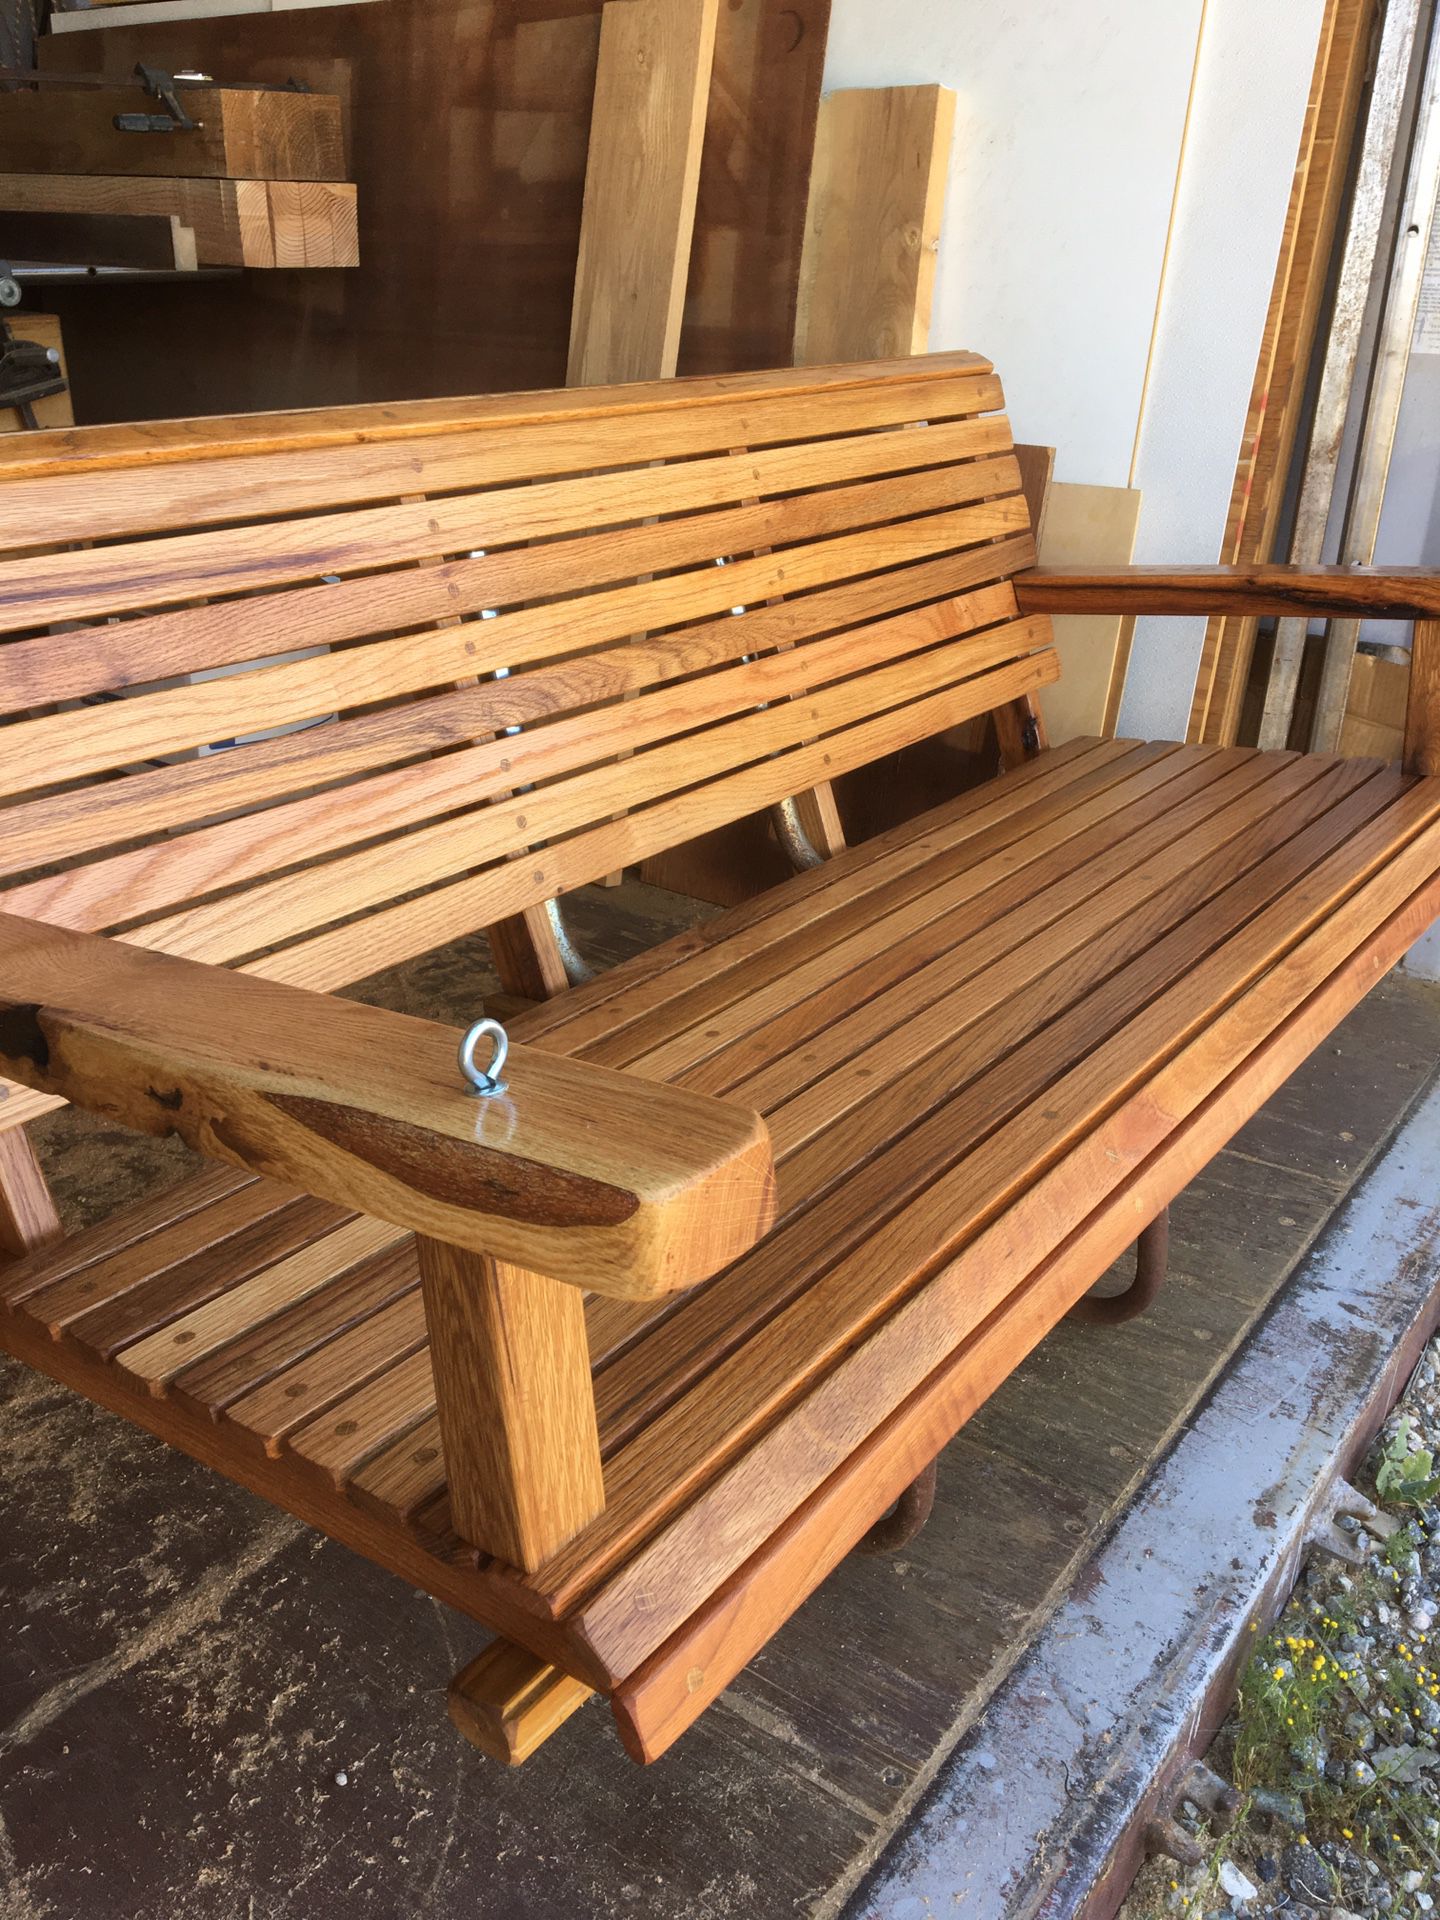 RED OAK PORCH SWING 54” Wide,TEAK OIL FINISH with chain $350